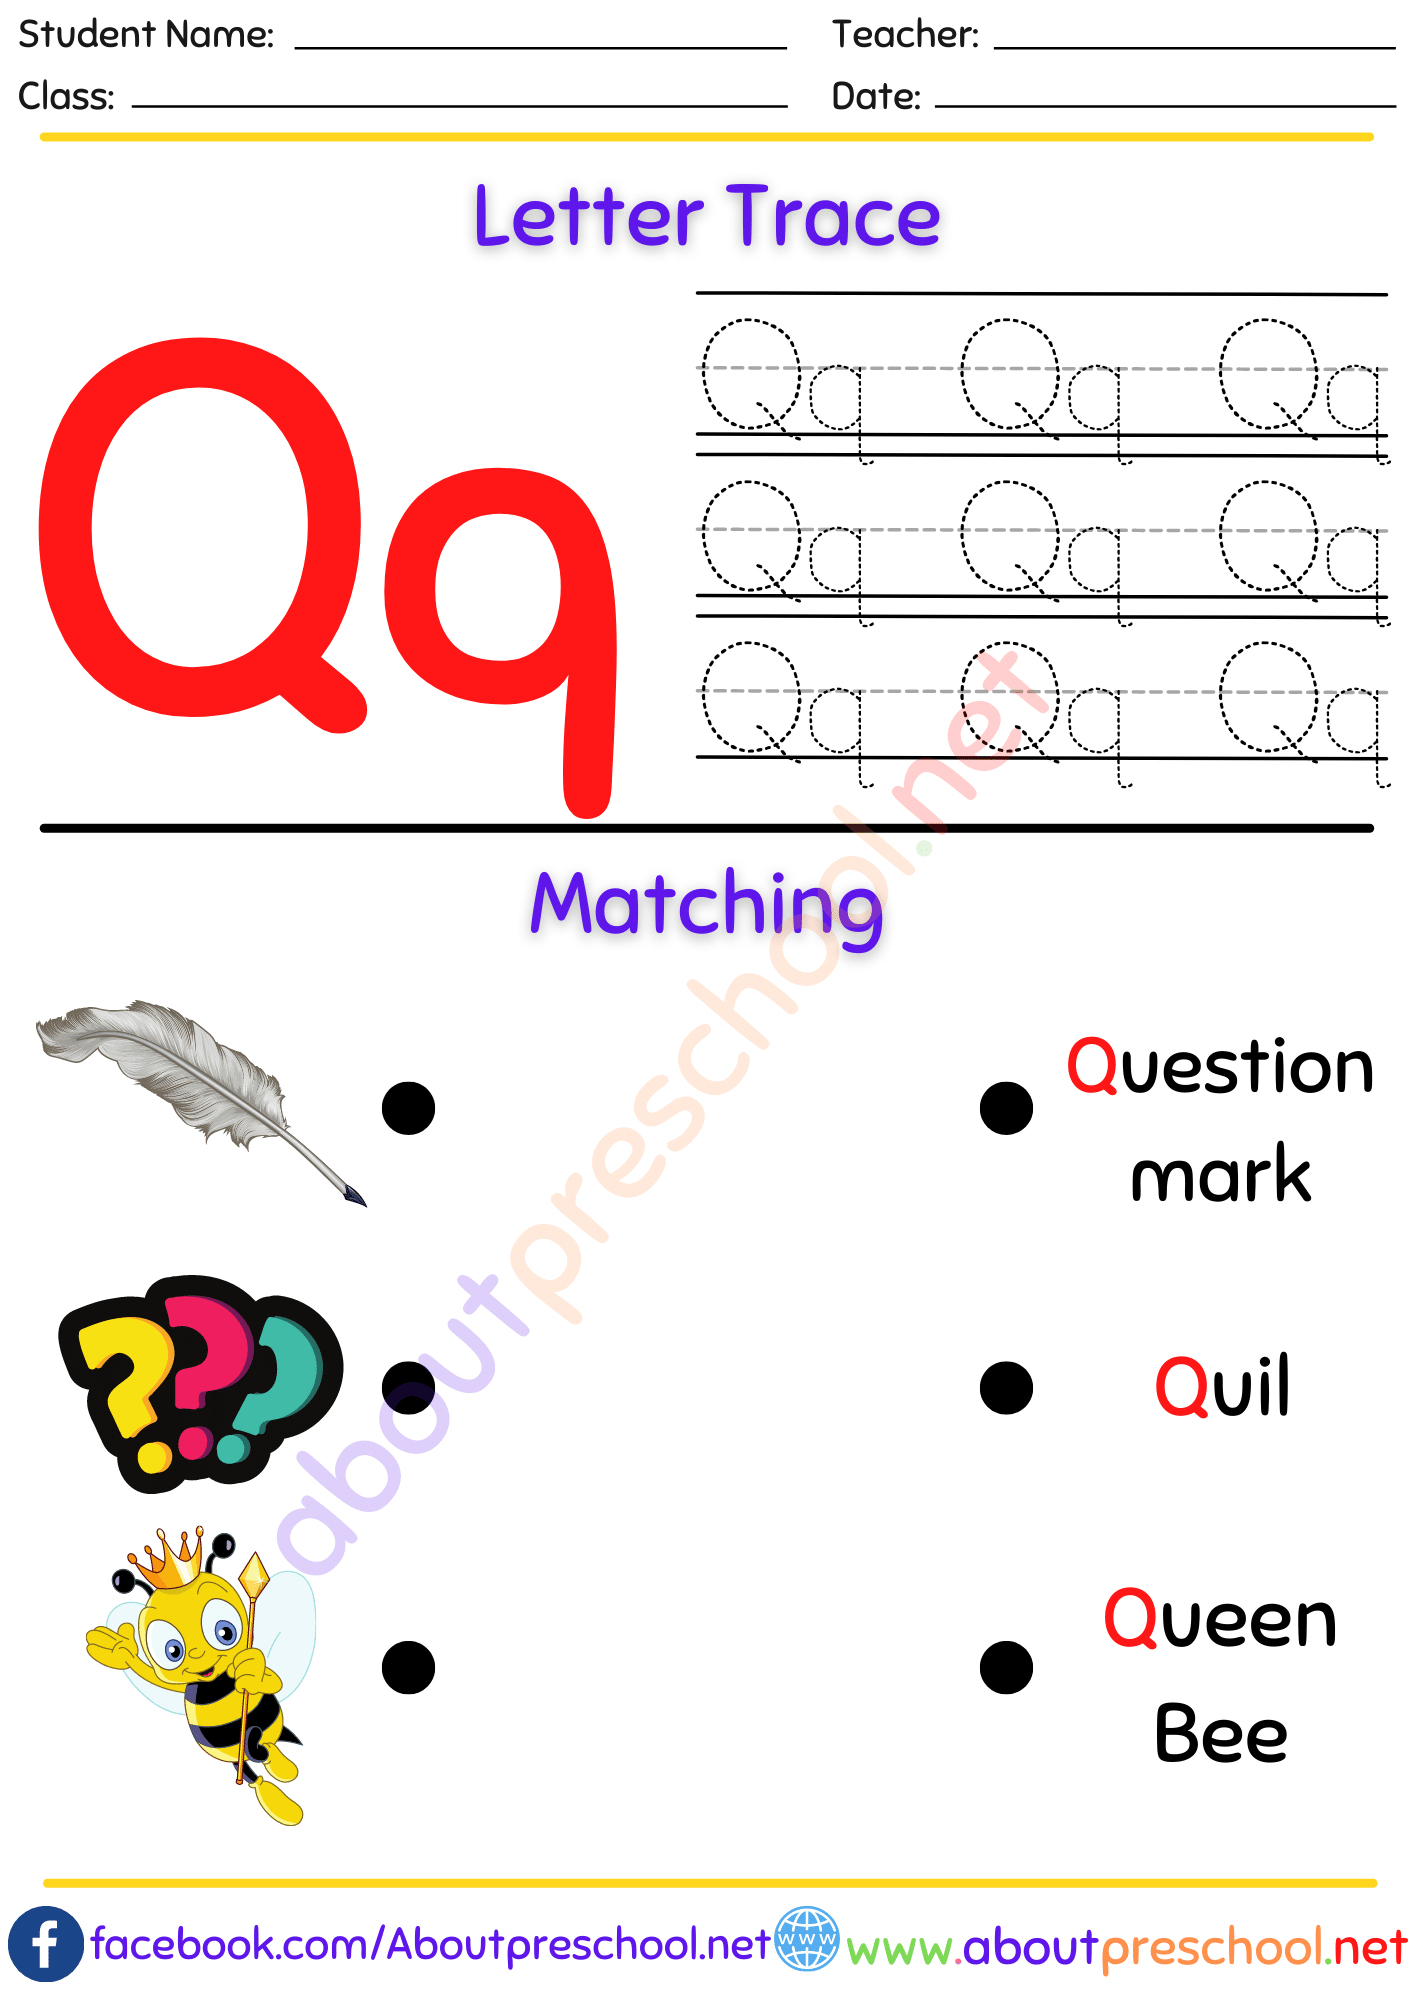 Letter Trace and Matching Q